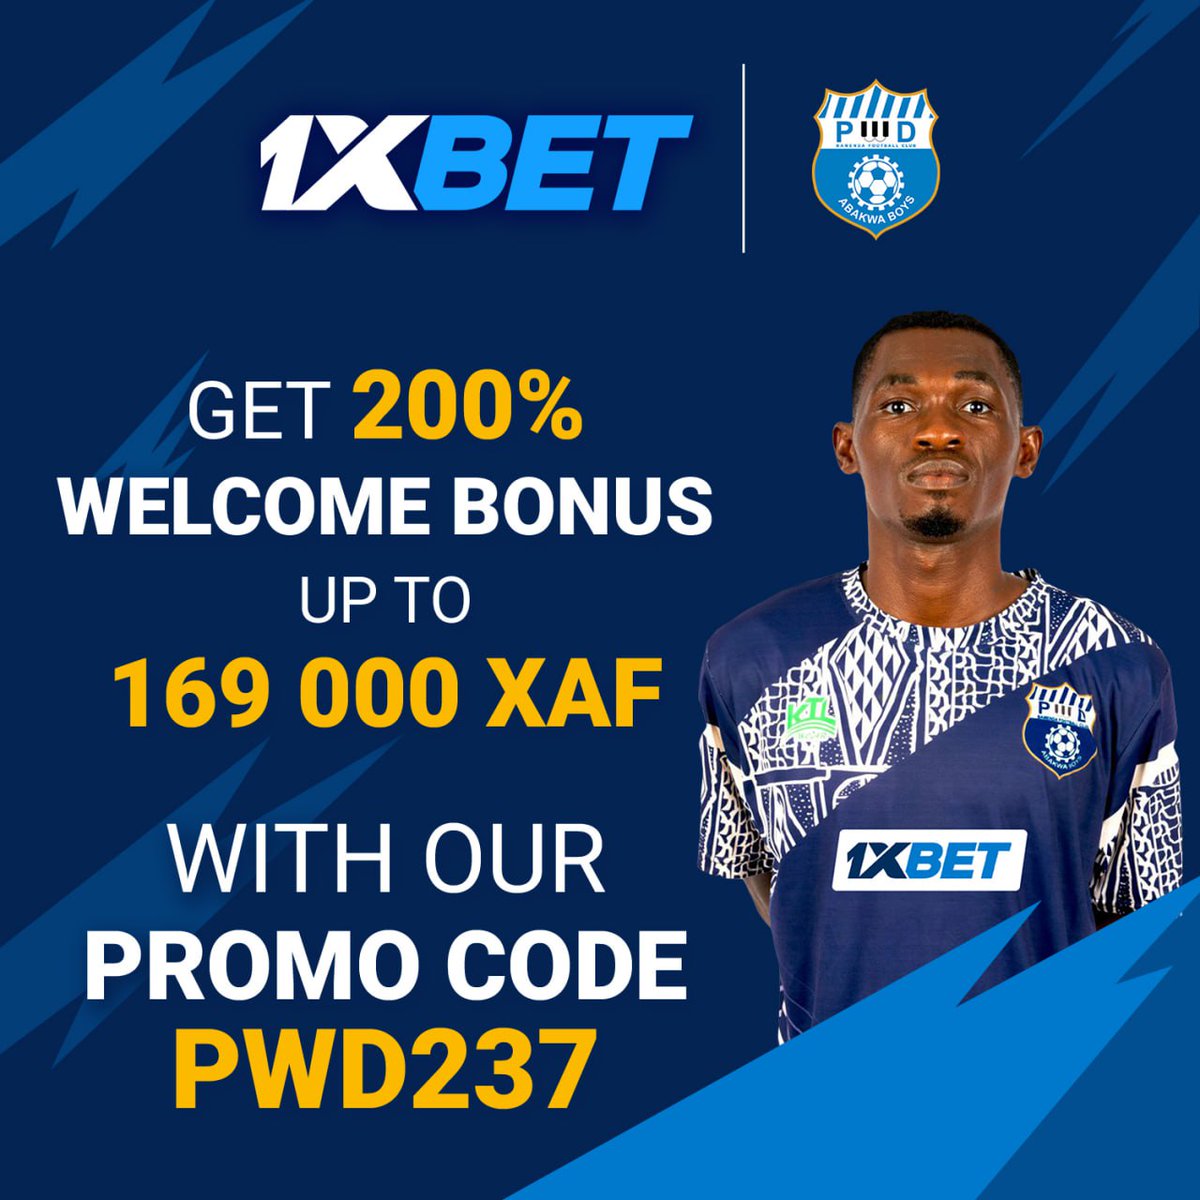 Boost your winning odds with our top tips! 🎯 Use promo code PWD237 for up to 169 000 XAF on your first 1xBet deposit: tinyurl.com/2esrrg99 1️⃣ Study teams: Analyze performances and stats 2️⃣ Diversify bets: Mix up markets for more wins 3️⃣ Evaluate odds: Seek value bets.